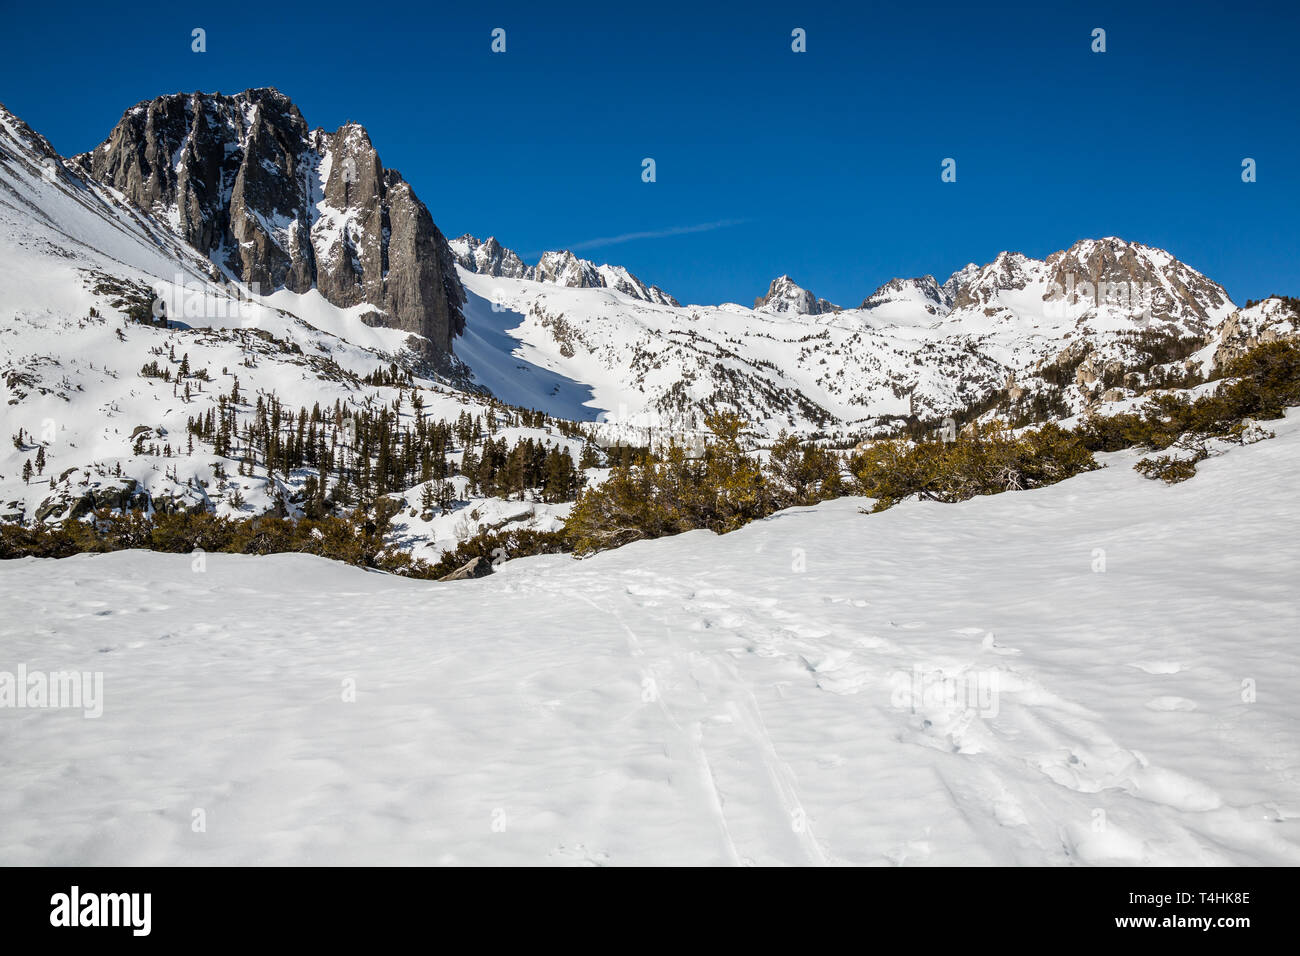 Hiking trail and skiing skin tracks through the snow in the North Fork drainage of Big Pine Creek. Temple Crag, North Palisade, Thunderbolt Peak, Moun Stock Photo